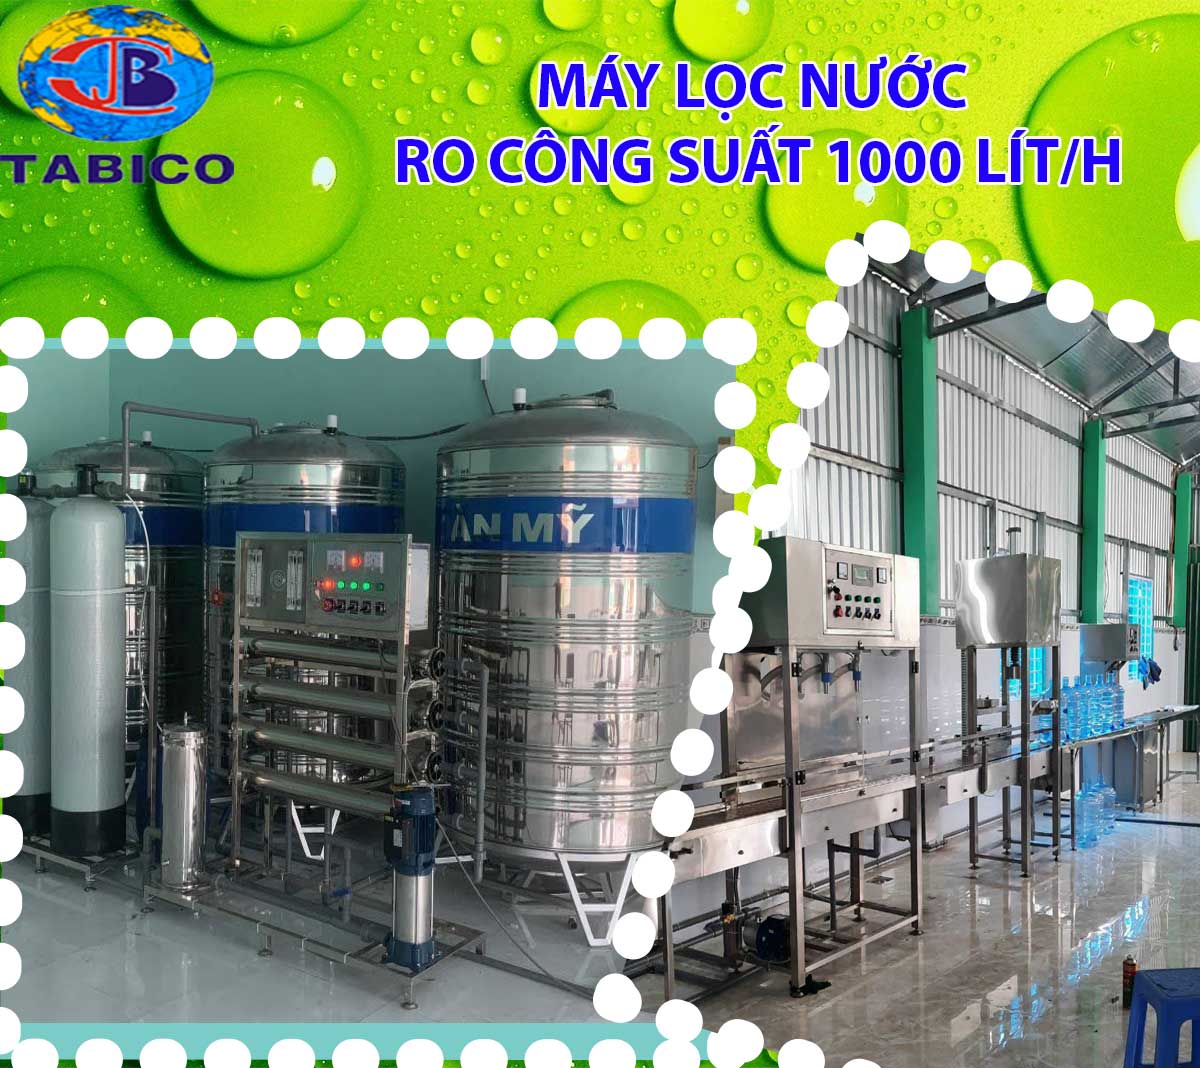 may loc nuoc ro cong suat 1000 lit/h